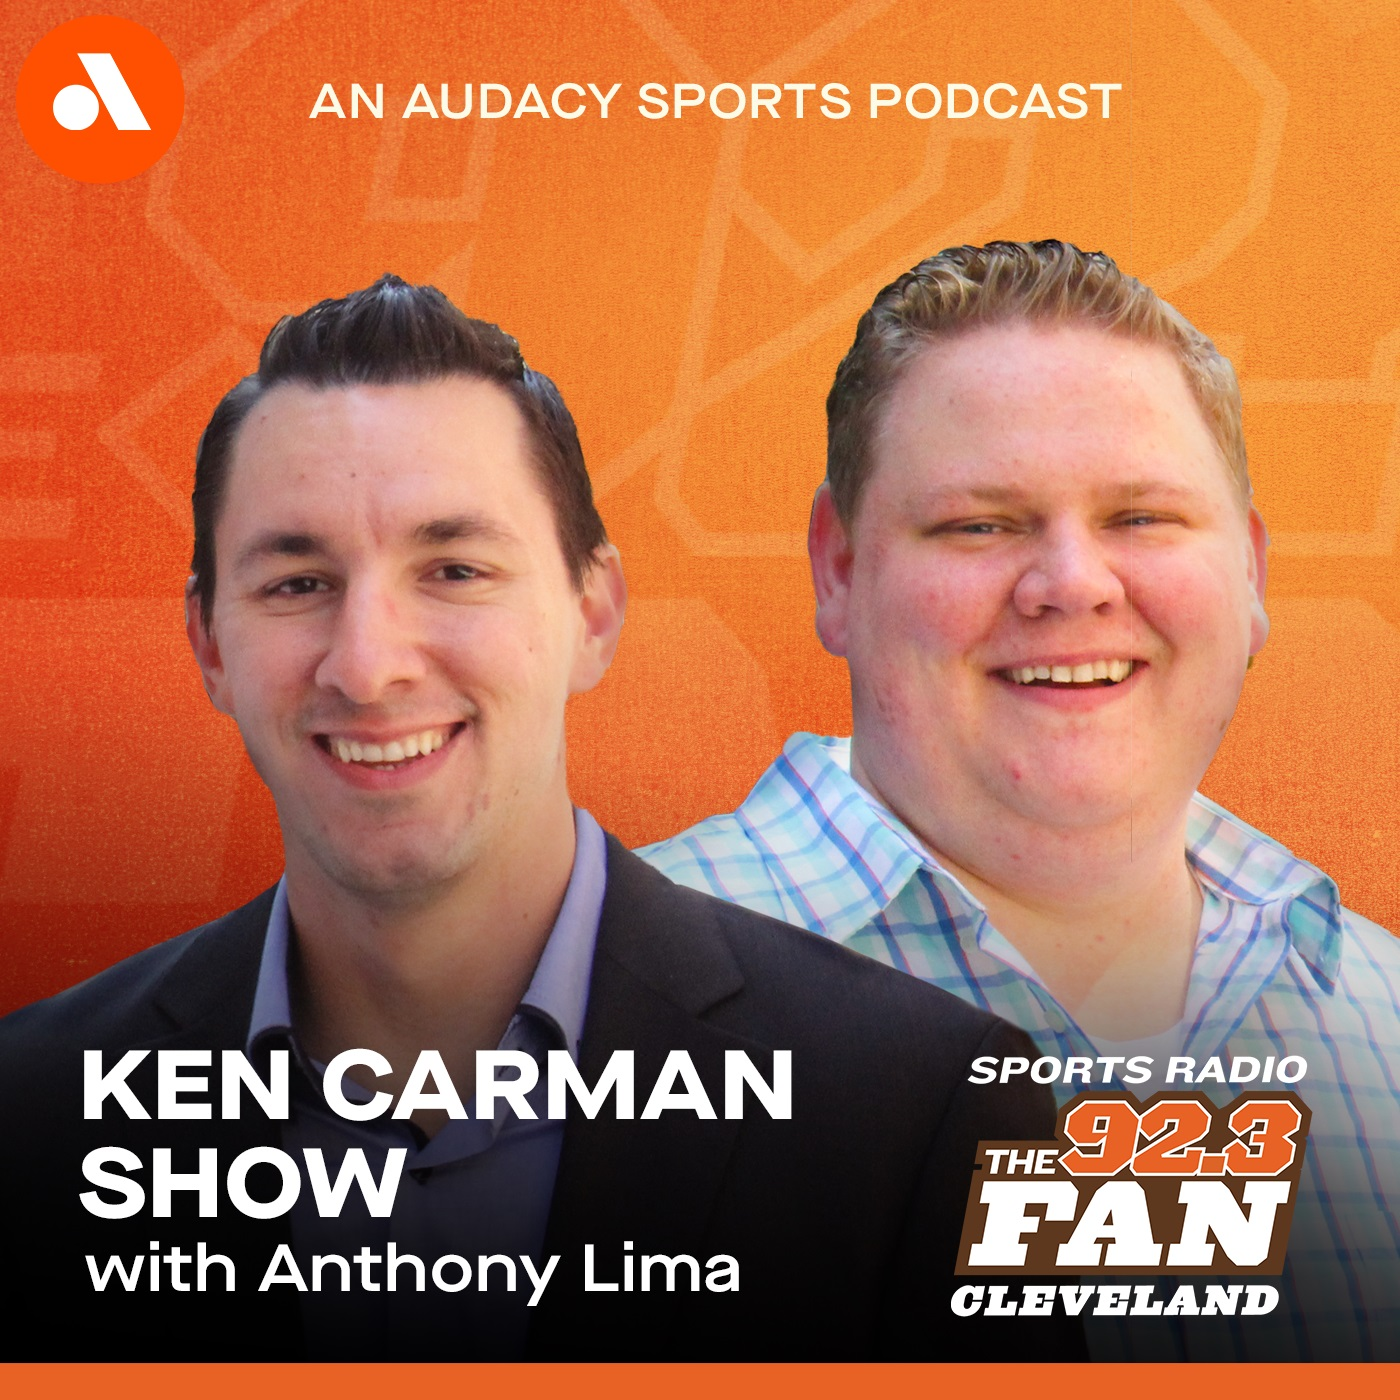 The Ken Carman Show with Anthony Lima reacts to the Browns 31-27 win over the Jaguars